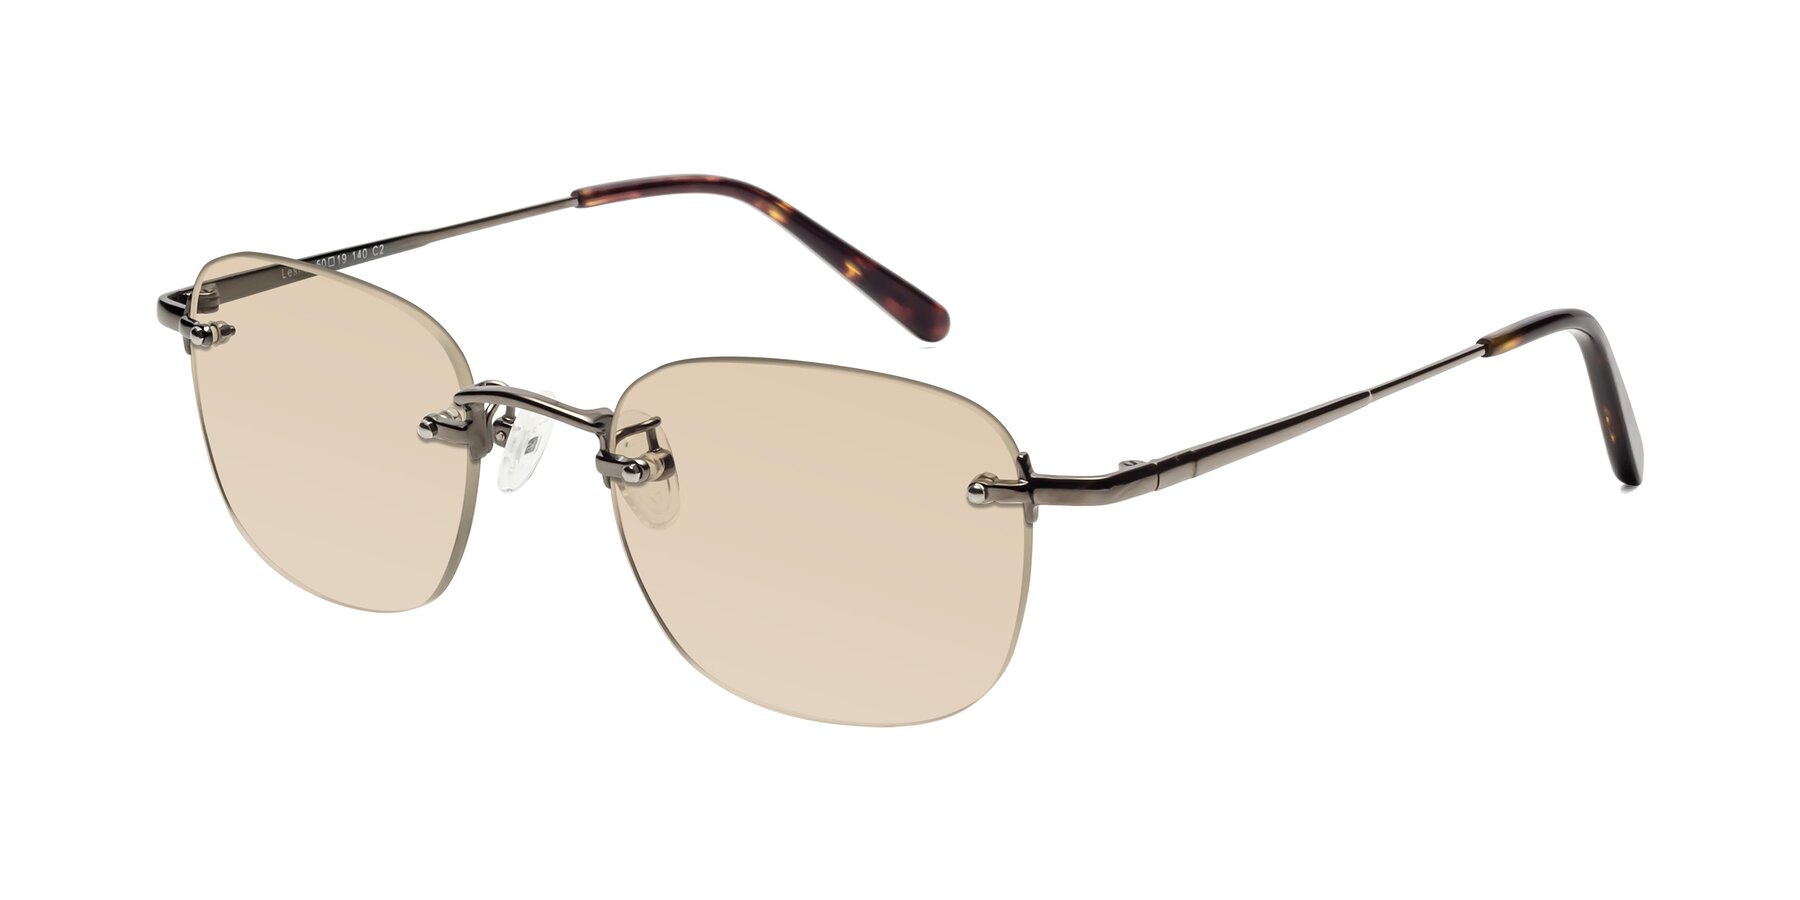 Angle of Leslie in Gunmetal with Light Brown Tinted Lenses